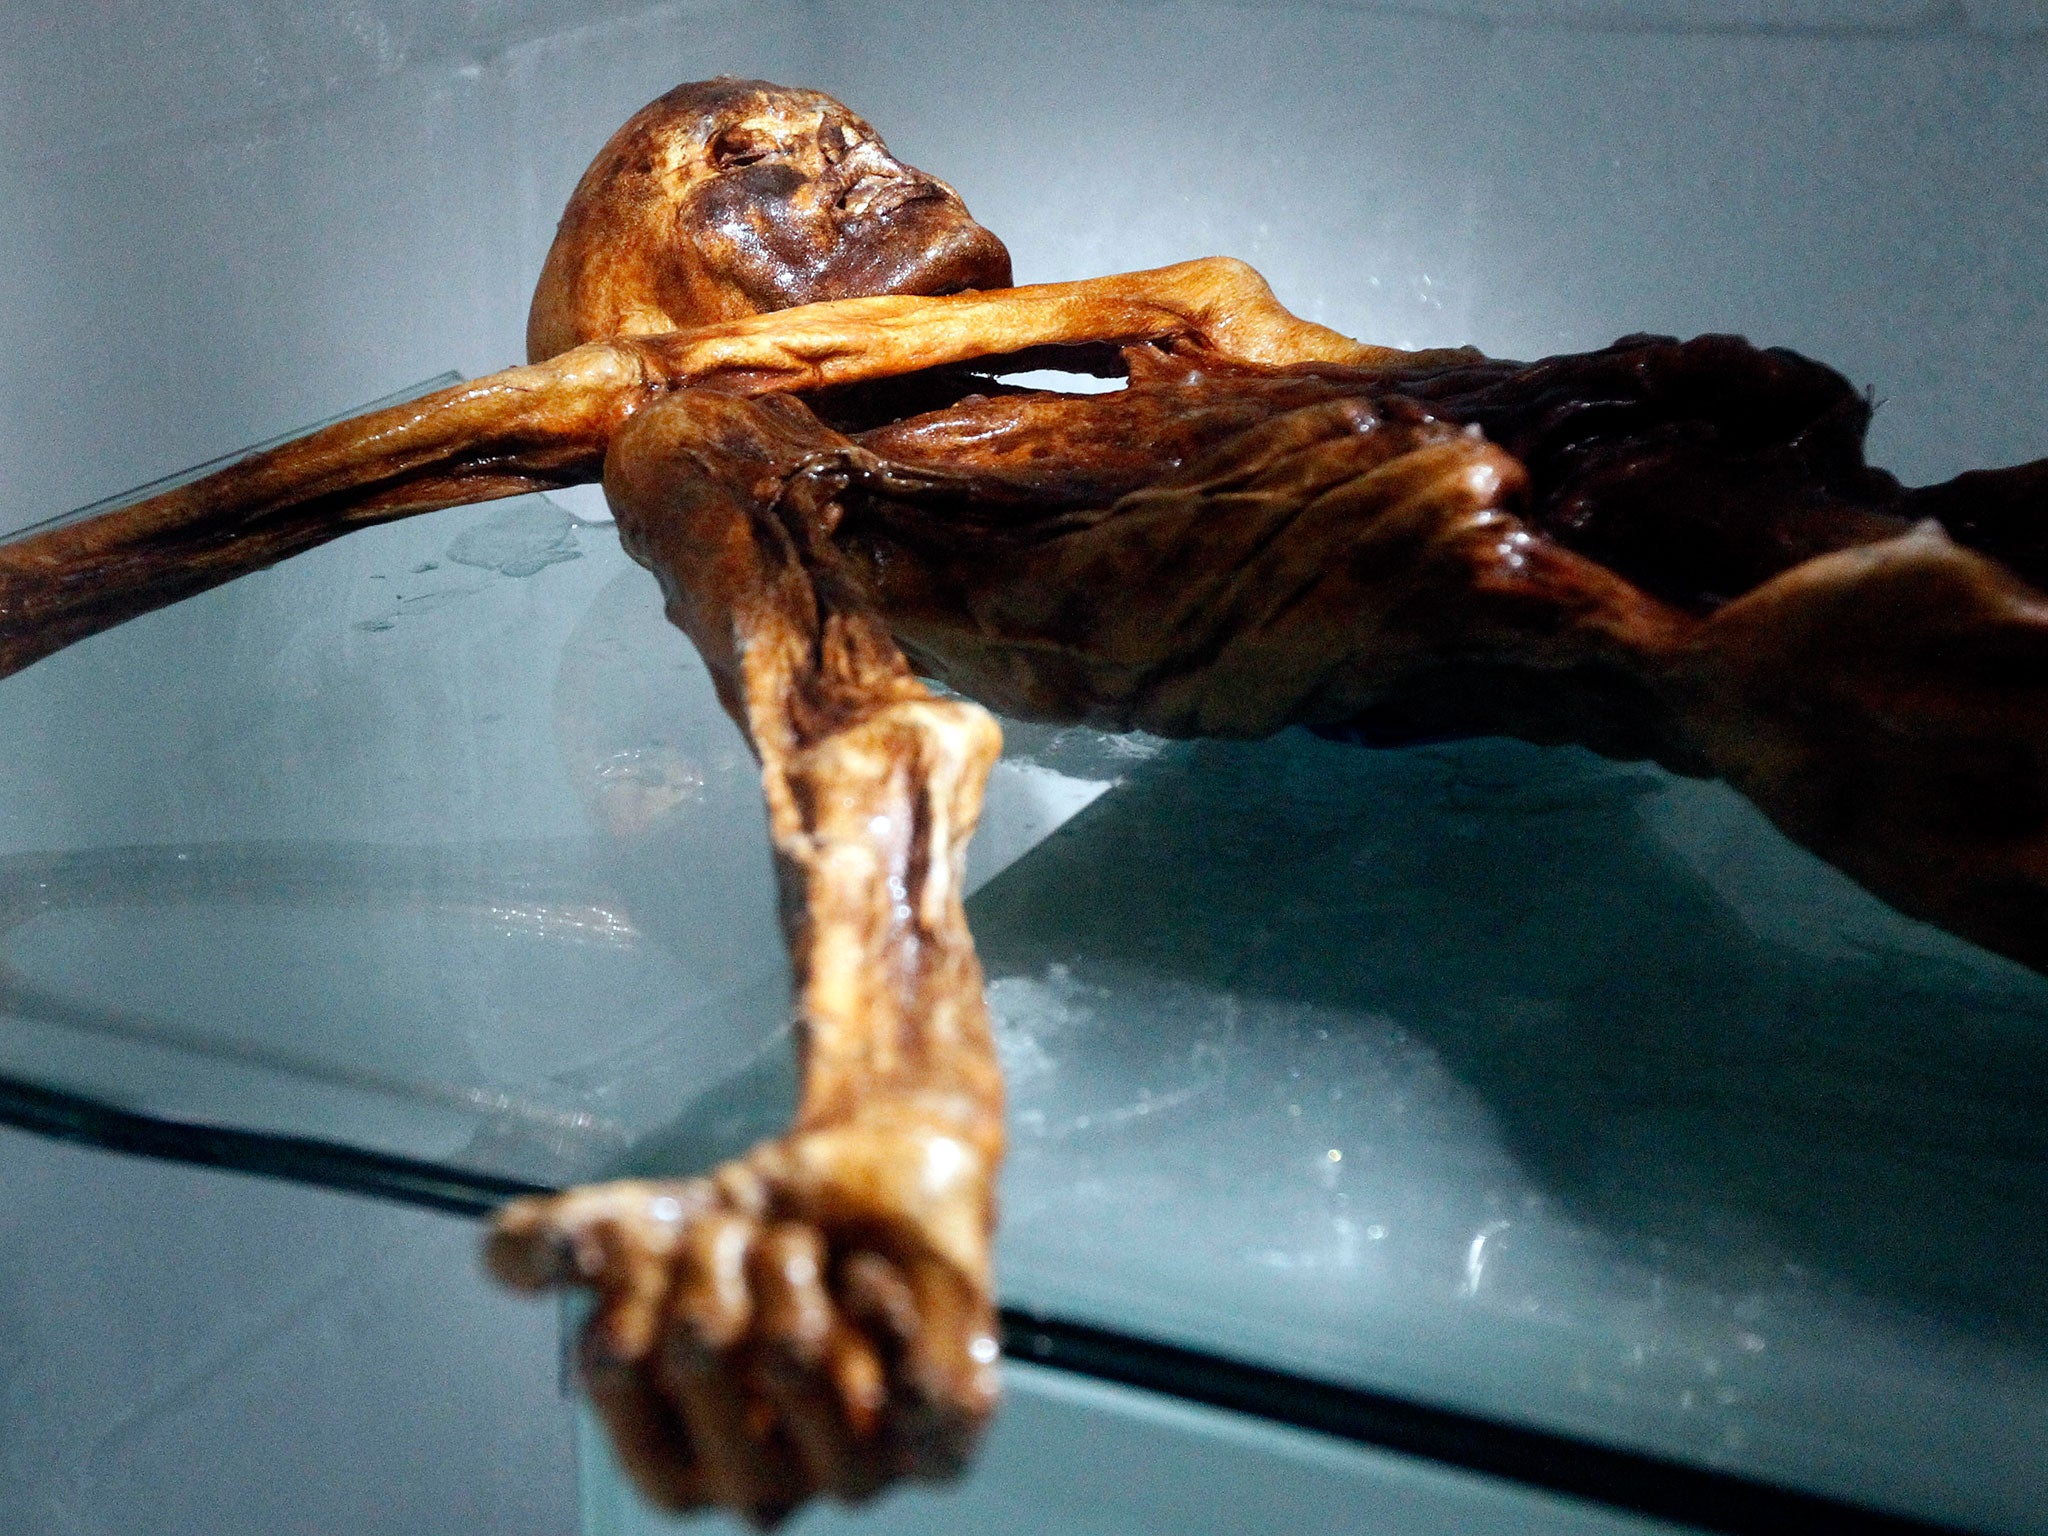 The mummy of an iceman named Otzi, discovered on 1991 in the Italian Schnal Valley glacier, is displayed at the Archaeological Museum of Bolzano